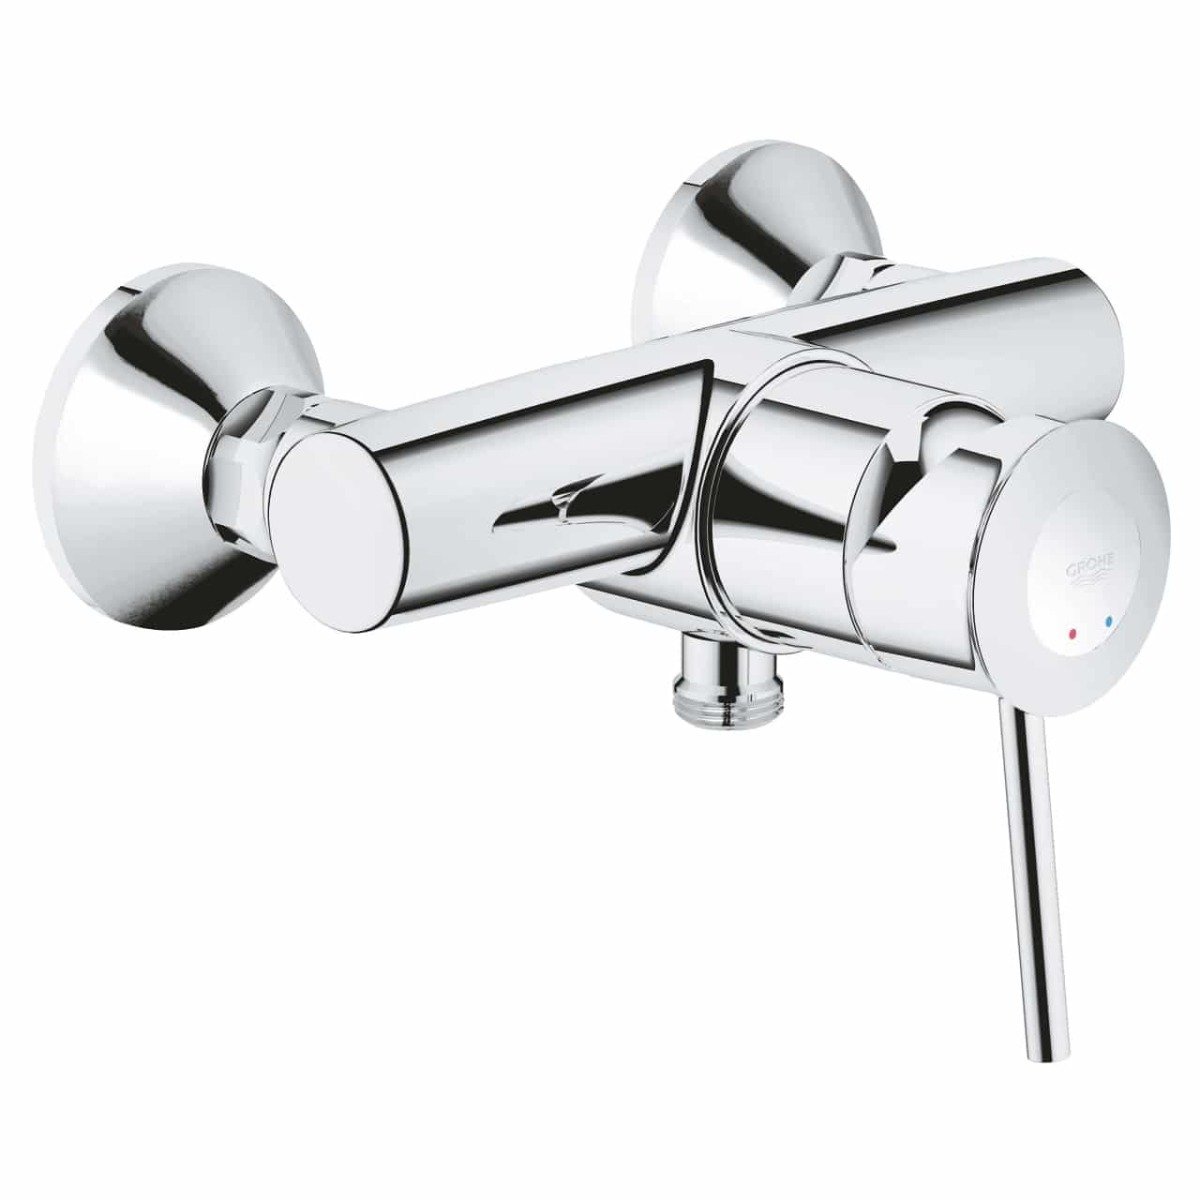 Baterie baie cabina dus Grohe Start Classic,montare pe perete, crom-23786000 baterii-lux.ro